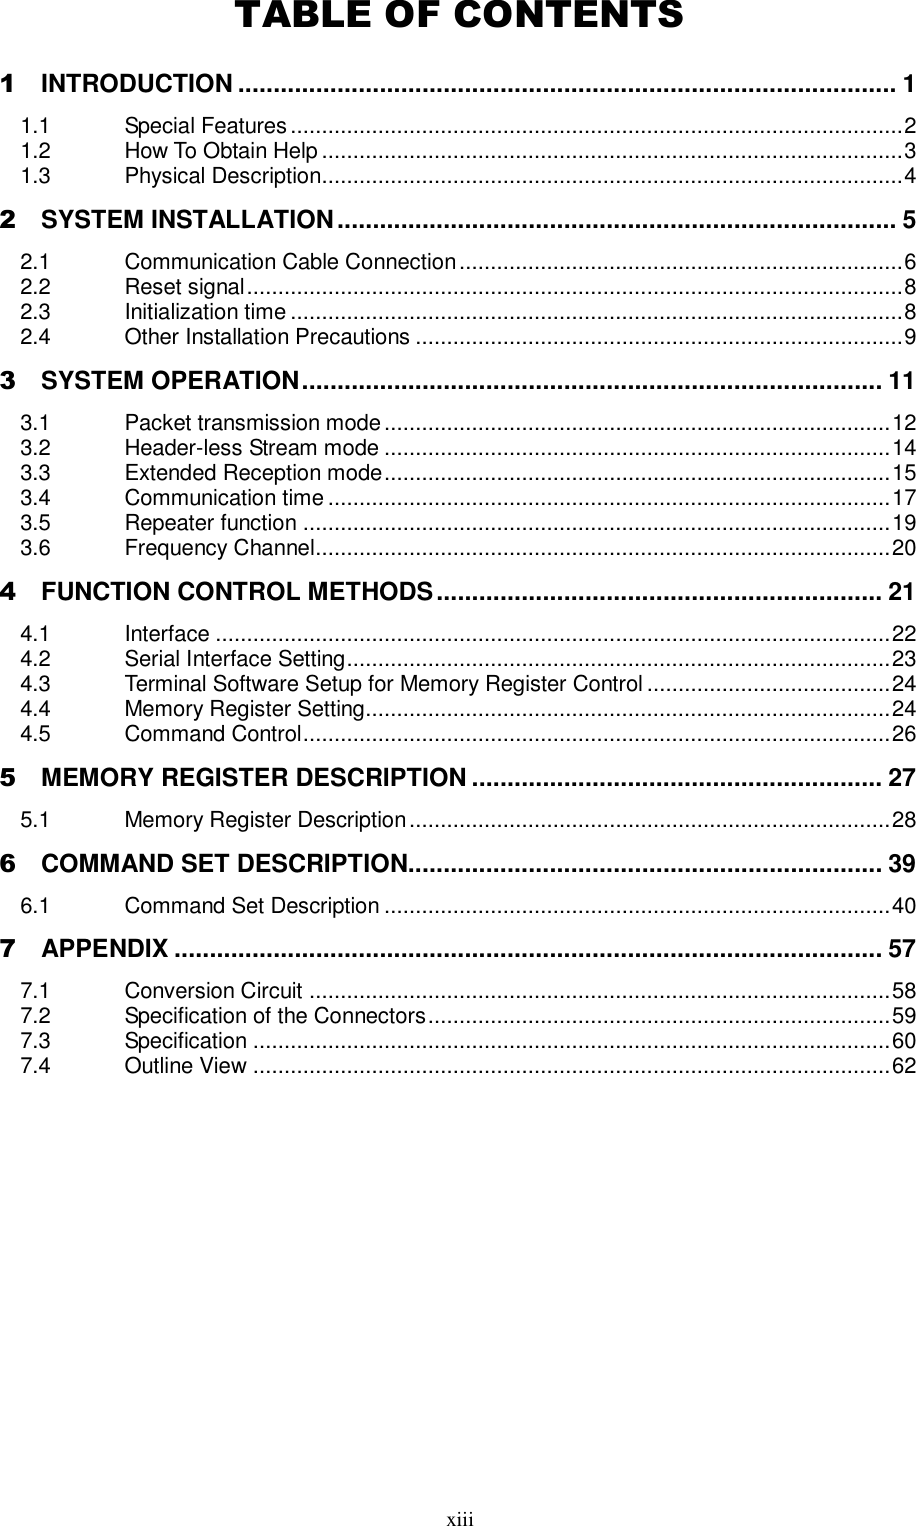  xiii  TABLE OF CONTENTS 1 INTRODUCTION ............................................................................................. 1 1.1 Special Features .................................................................................................. 2 1.2 How To Obtain Help ............................................................................................. 3 1.3 Physical Description............................................................................................. 4 2 SYSTEM INSTALLATION ............................................................................... 5 2.1 Communication Cable Connection ....................................................................... 6 2.2 Reset signal ......................................................................................................... 8 2.3 Initialization time .................................................................................................. 8 2.4 Other Installation Precautions .............................................................................. 9 3 SYSTEM OPERATION .................................................................................. 11 3.1 Packet transmission mode ................................................................................. 12 3.2 Header-less Stream mode ................................................................................. 14 3.3 Extended Reception mode ................................................................................. 15 3.4 Communication time .......................................................................................... 17 3.5 Repeater function .............................................................................................. 19 3.6 Frequency Channel............................................................................................ 20 4 FUNCTION CONTROL METHODS ............................................................... 21 4.1 Interface ............................................................................................................ 22 4.2 Serial Interface Setting ....................................................................................... 23 4.3 Terminal Software Setup for Memory Register Control ....................................... 24 4.4 Memory Register Setting.................................................................................... 24 4.5 Command Control .............................................................................................. 26 5 MEMORY REGISTER DESCRIPTION .......................................................... 27 5.1 Memory Register Description ............................................................................. 28 6 COMMAND SET DESCRIPTION................................................................... 39 6.1 Command Set Description ................................................................................. 40 7 APPENDIX .................................................................................................... 57 7.1 Conversion Circuit ............................................................................................. 58 7.2 Specification of the Connectors .......................................................................... 59 7.3 Specification ...................................................................................................... 60 7.4 Outline View ...................................................................................................... 62   